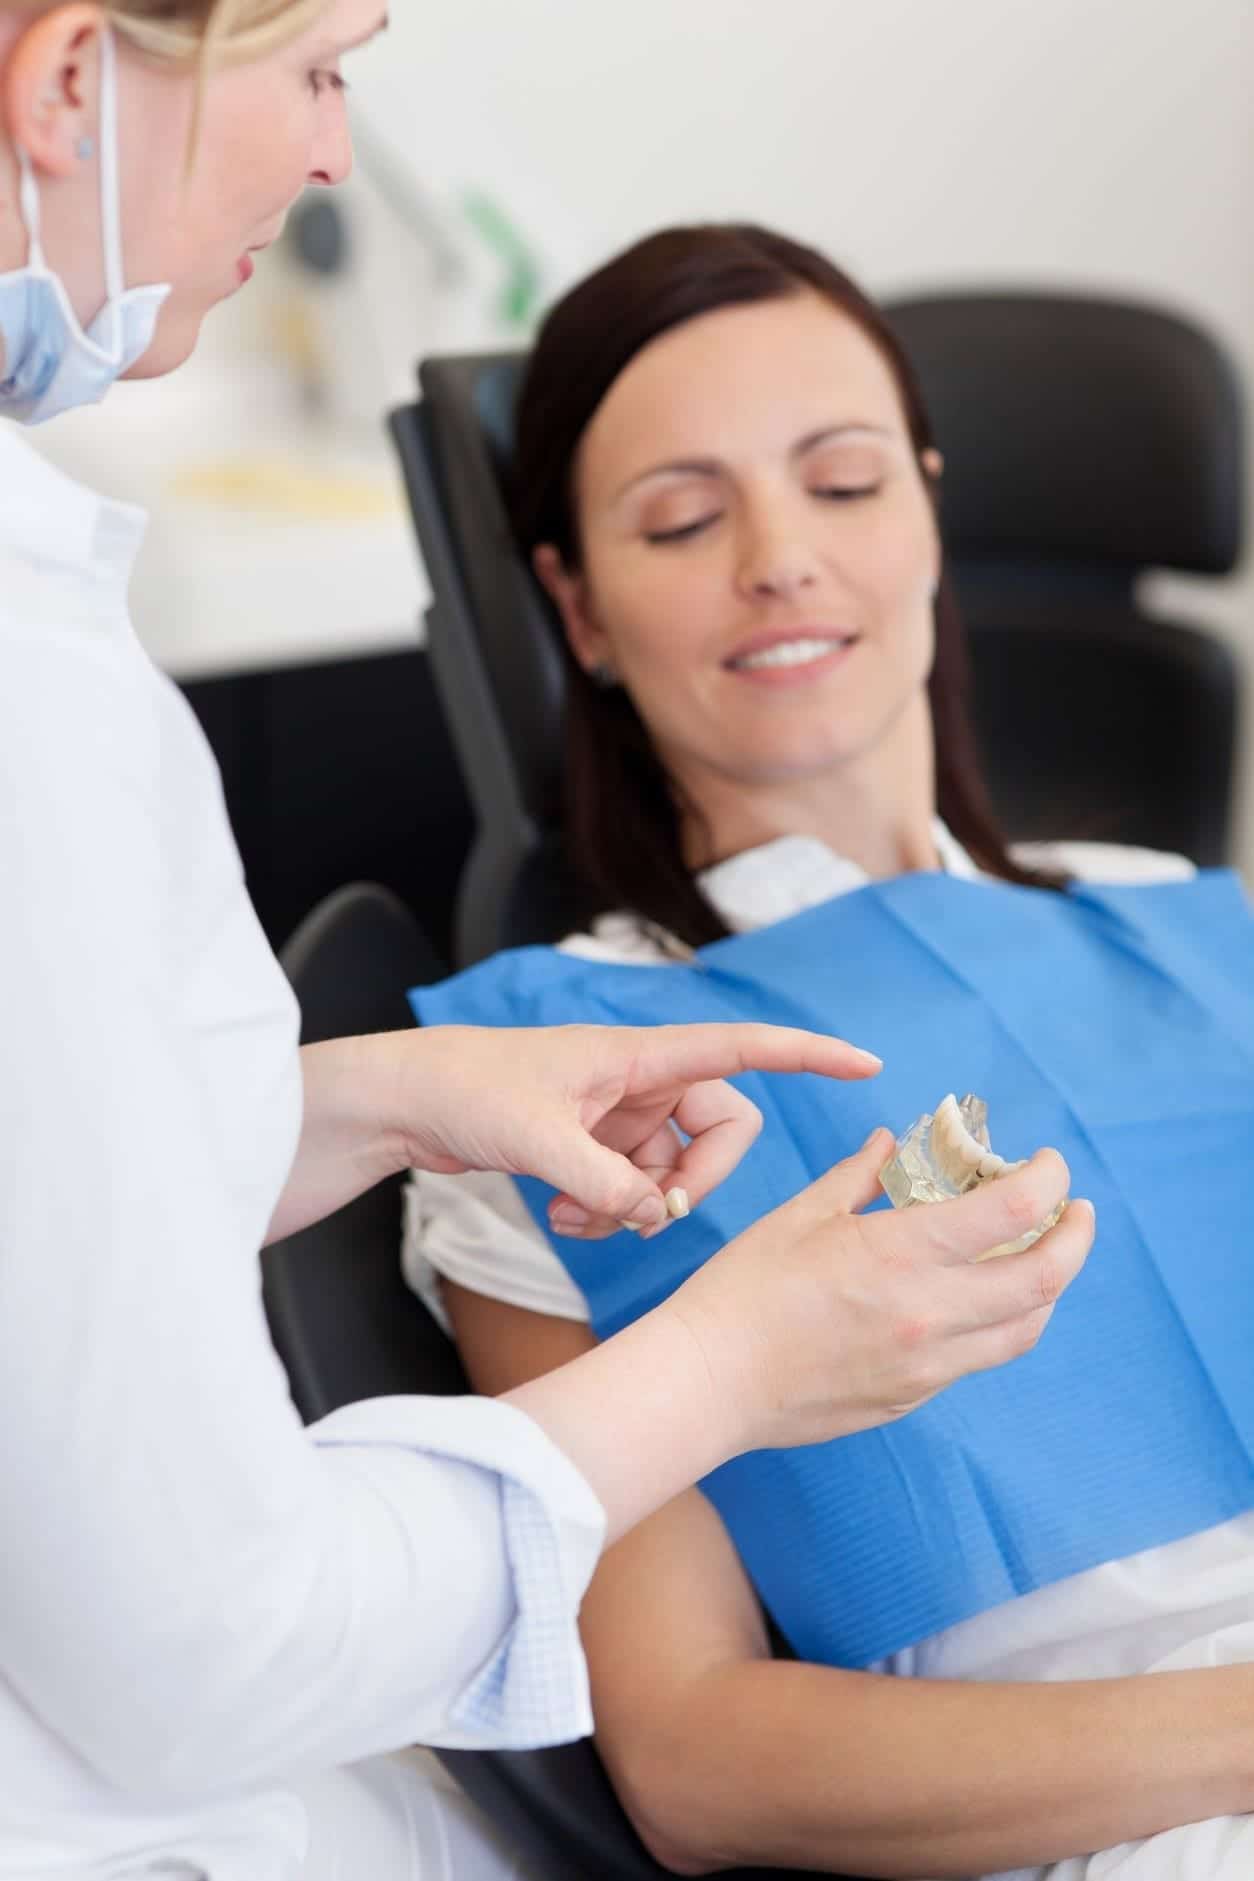 How Does Getting a Dental Crown Work